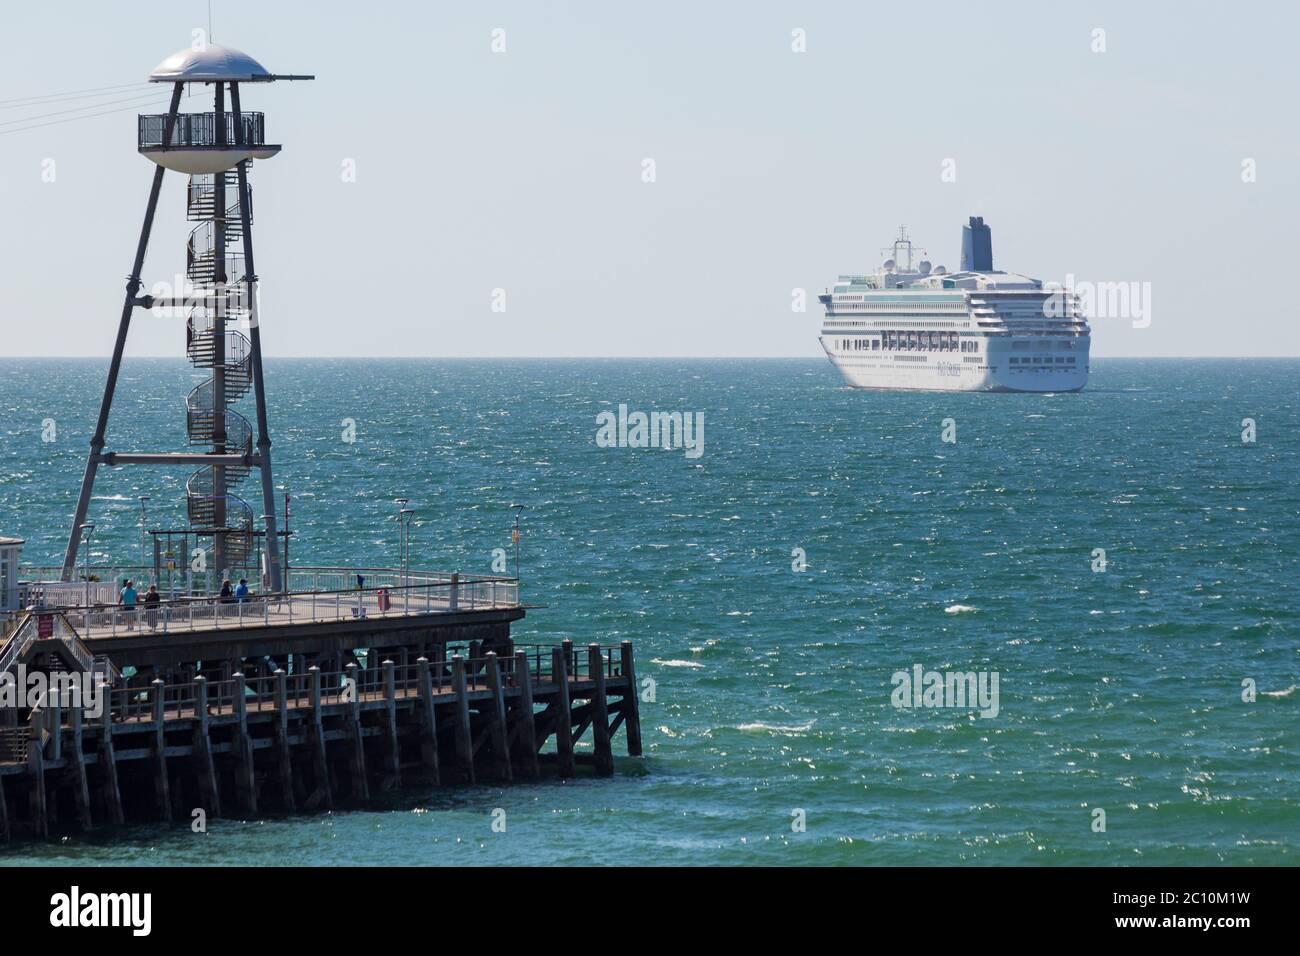 Bournemouth, Dorset UK. 13th June 2020. P&O cruise ship Arcadia joins Aurora moored at Poole Bay, Bournemouth as not enough room at Southampton; they are not cruising due to Coronavirus pandemic closing down the cruising industry forcing the companies to lay up their ships. Viewed from the beach. Credit: Carolyn Jenkins/Alamy Live News Stock Photo